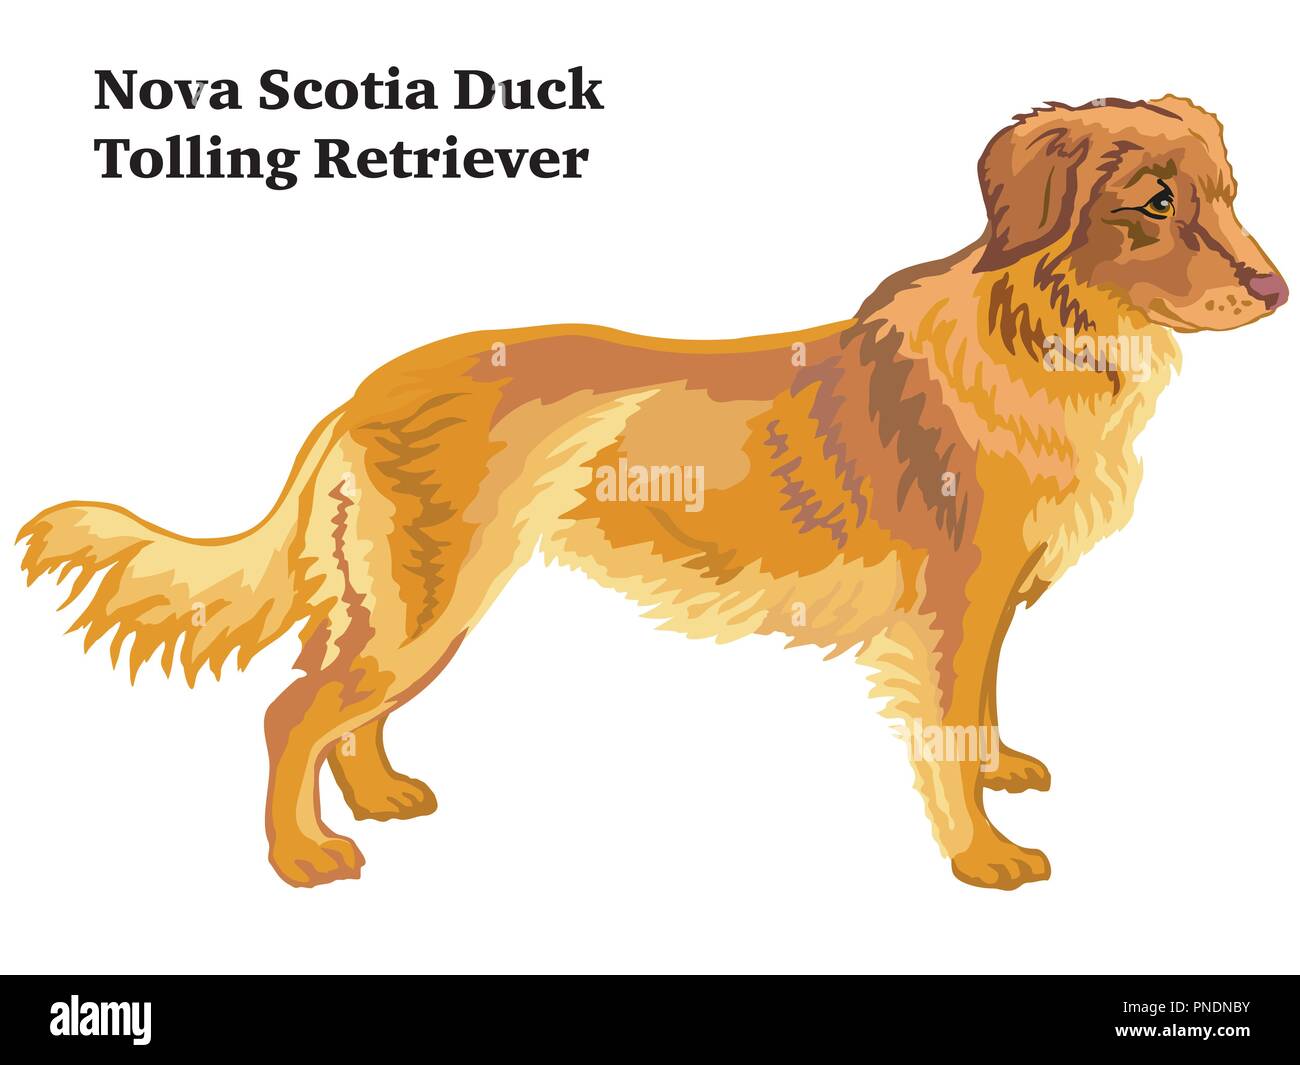 Portrait of standing in profile Nova Scotia Duck Tolling Retriever dog, vector colorful illustration isolated on white background Stock Vector